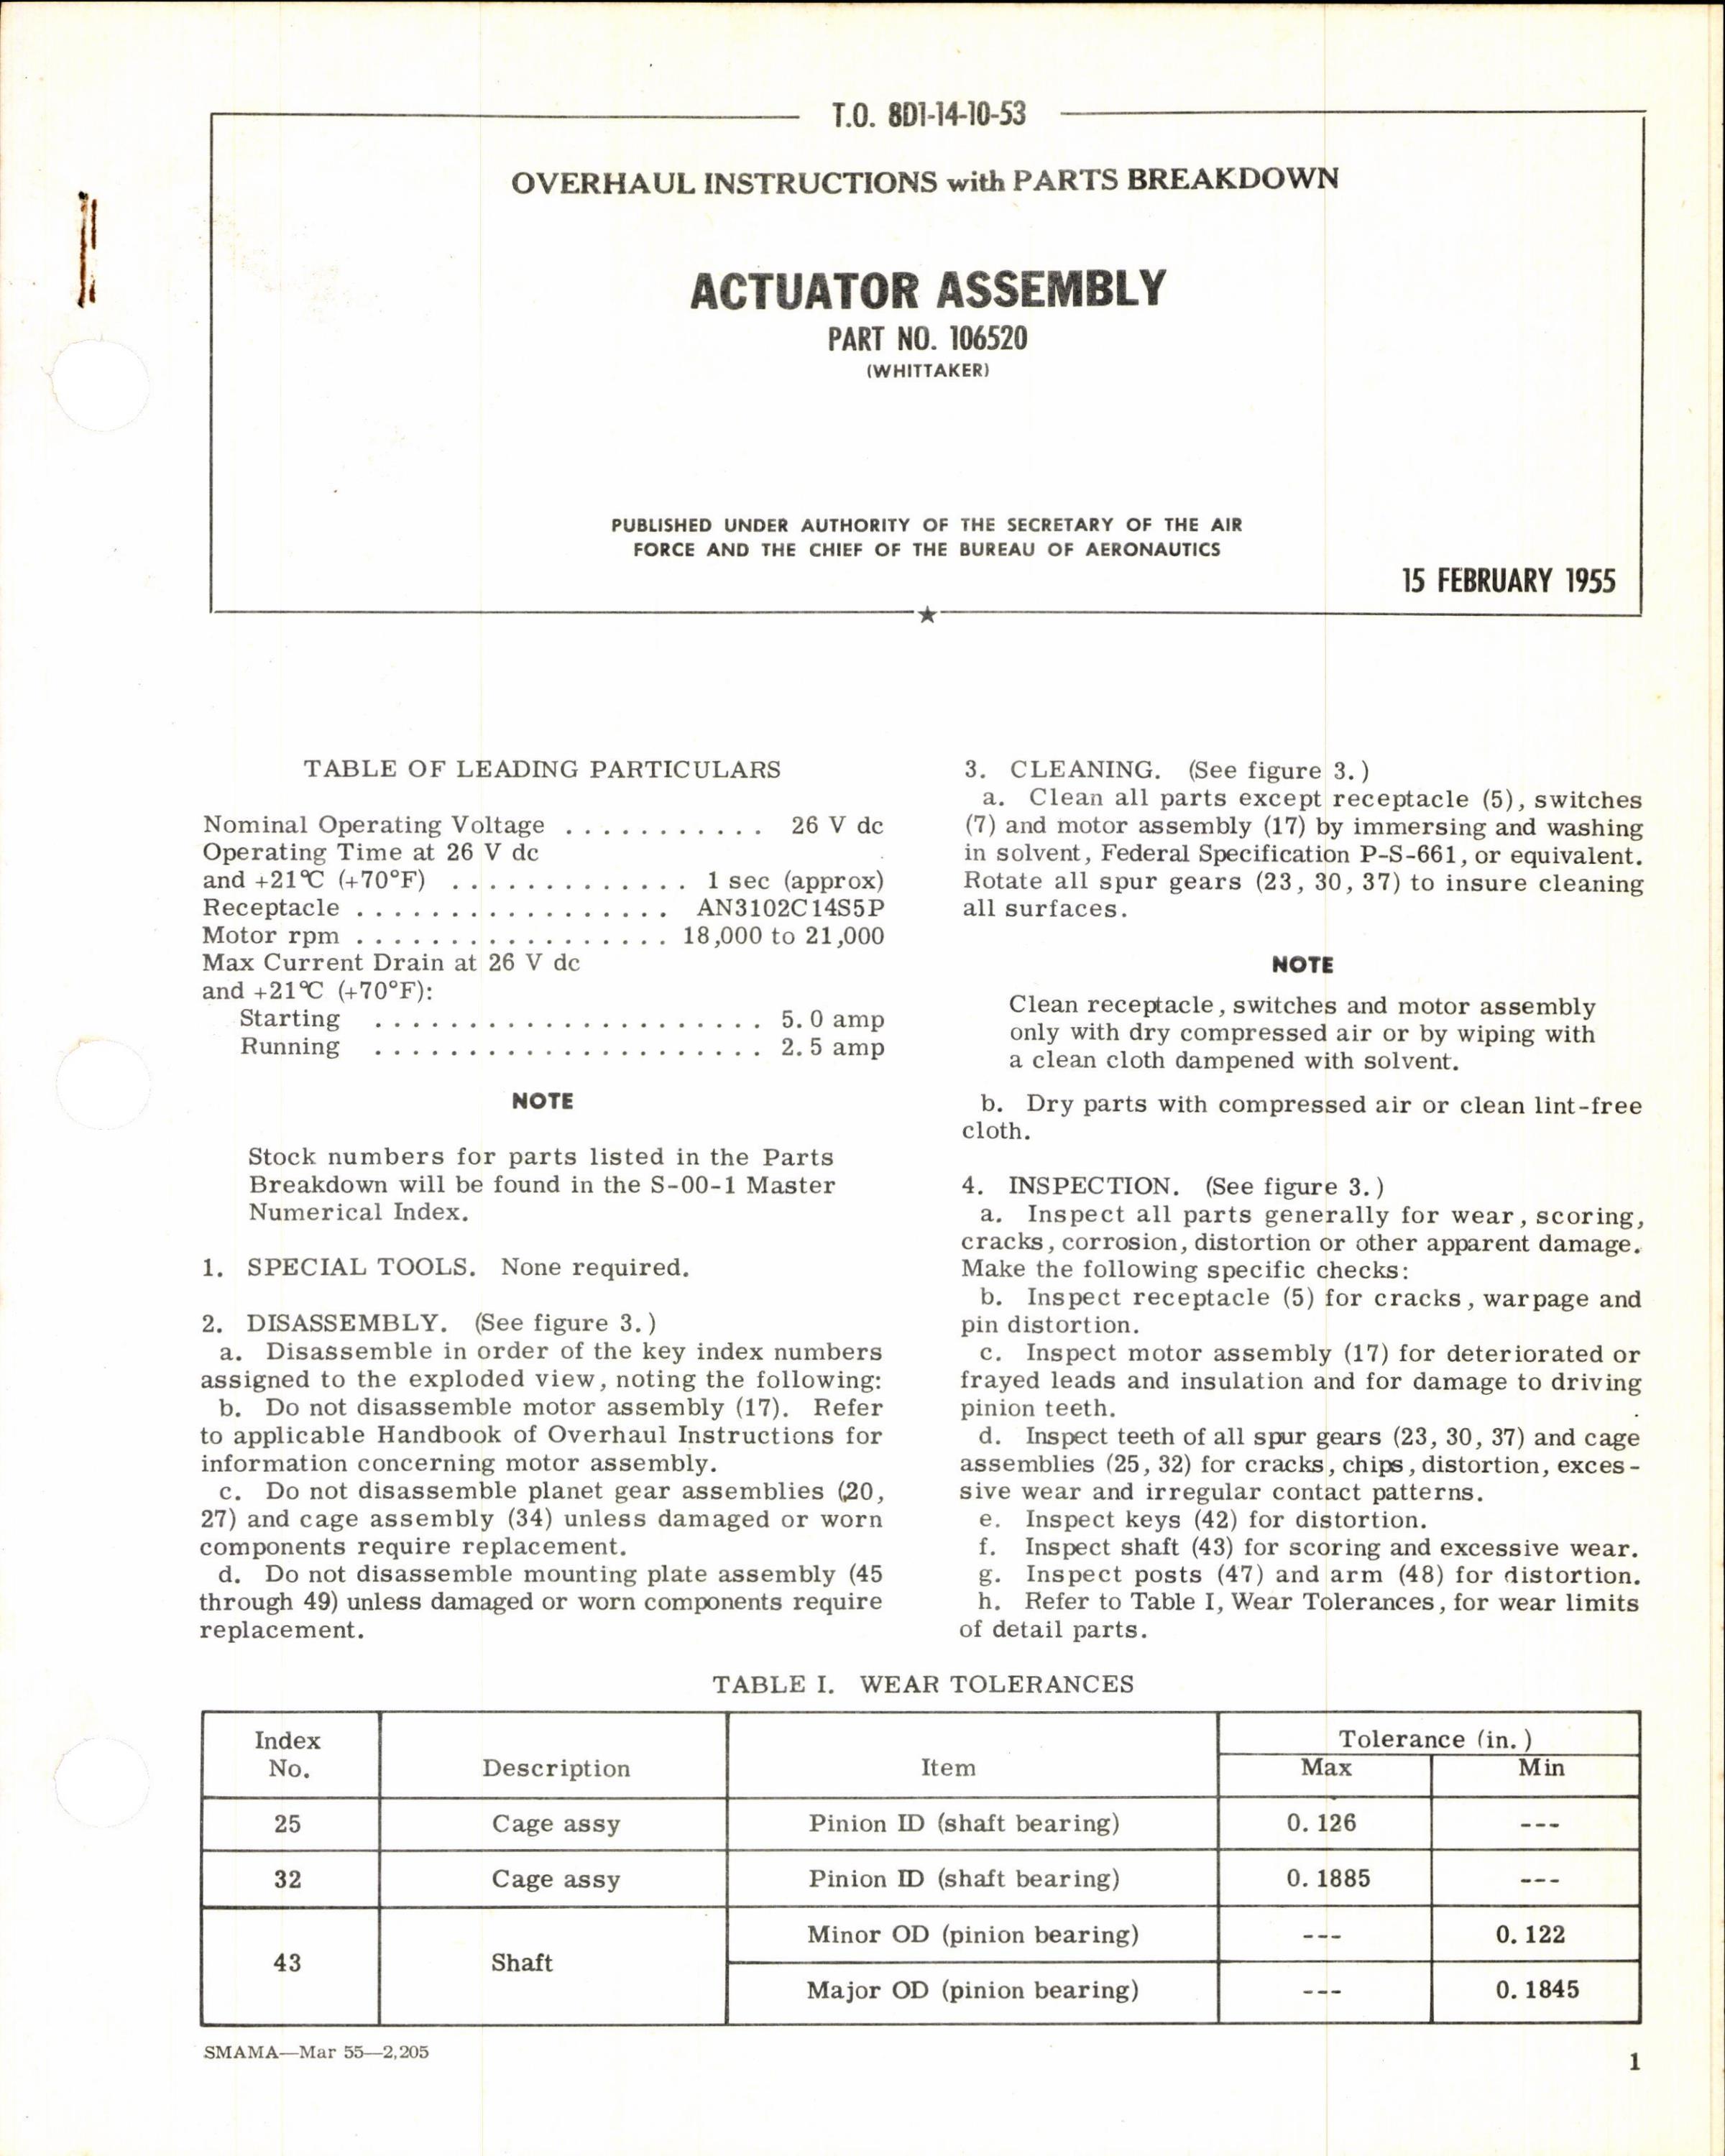 Sample page 1 from AirCorps Library document: Instructions w Parts Breakdown for Actuator Assembly Part 106520